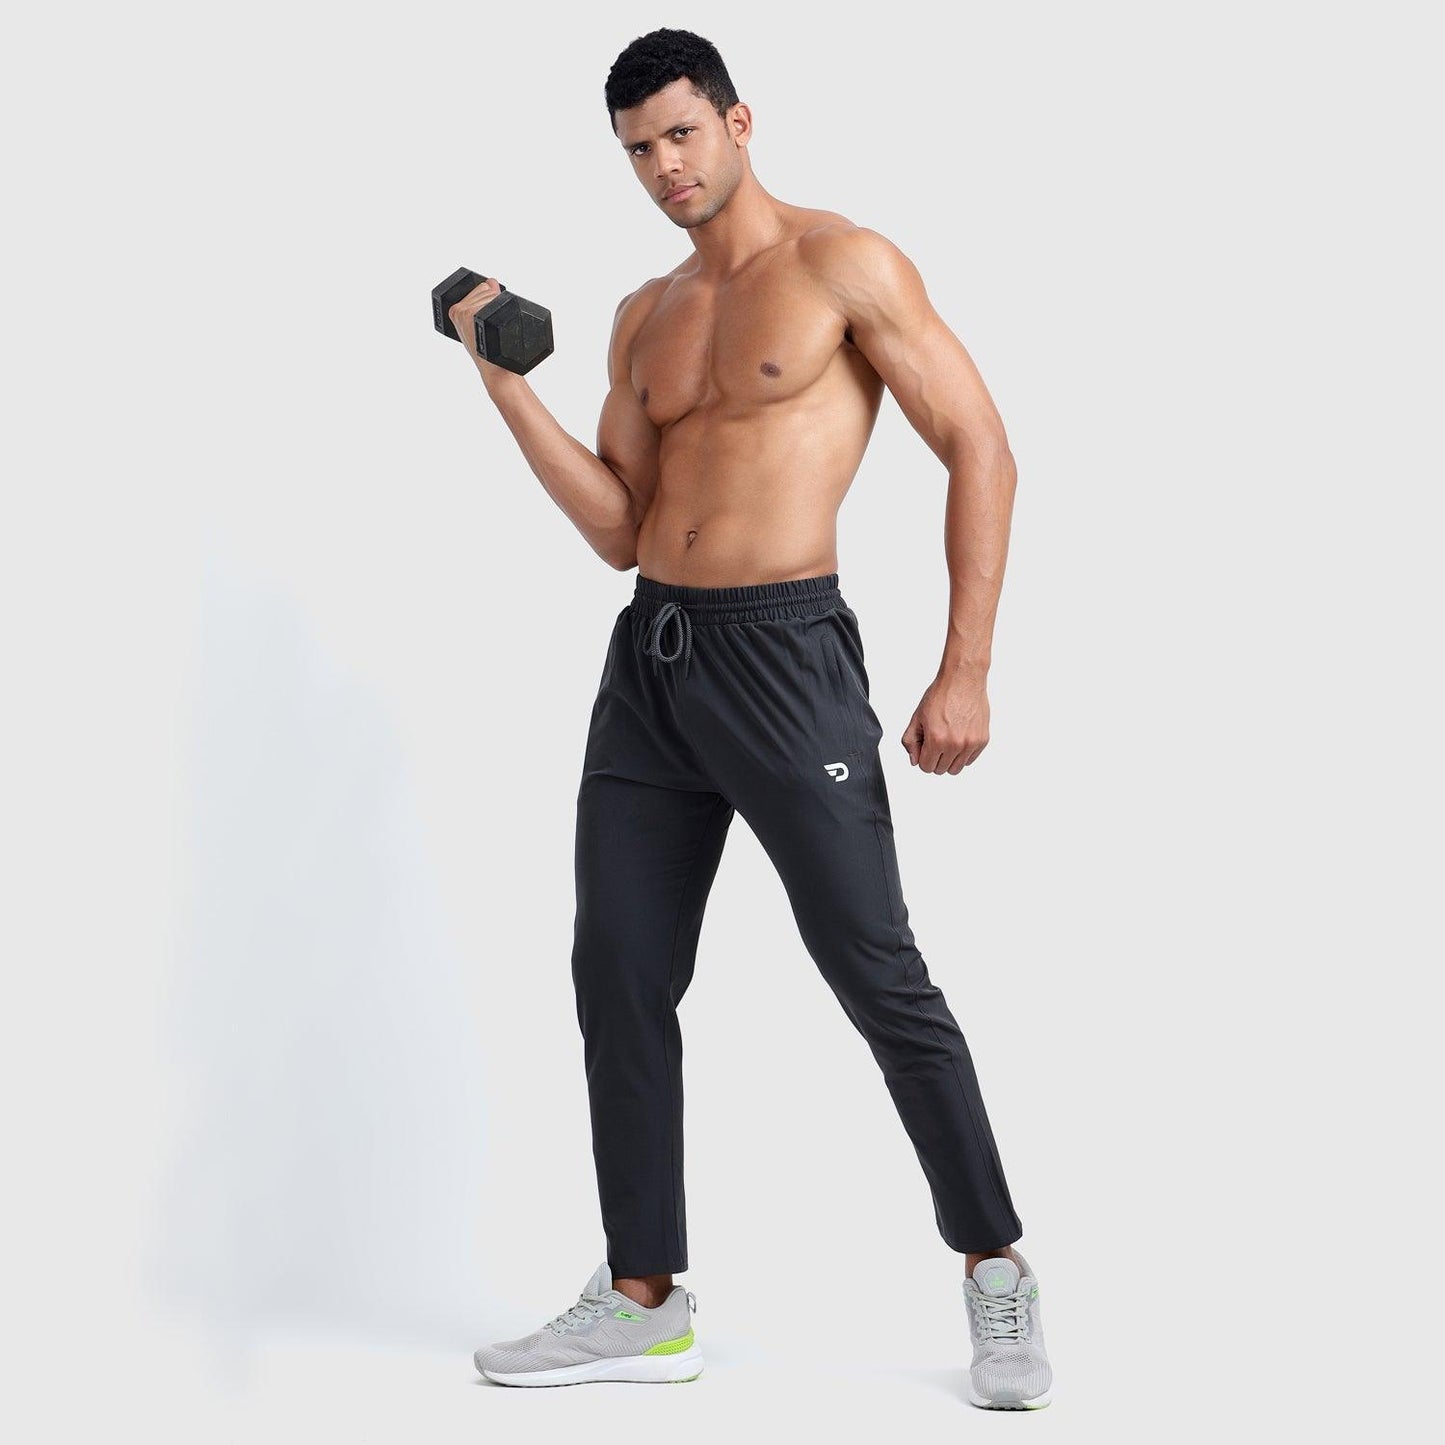 Denmonk: Elevate your look with these Stayactive sharp charcoal Trackpant for mens.